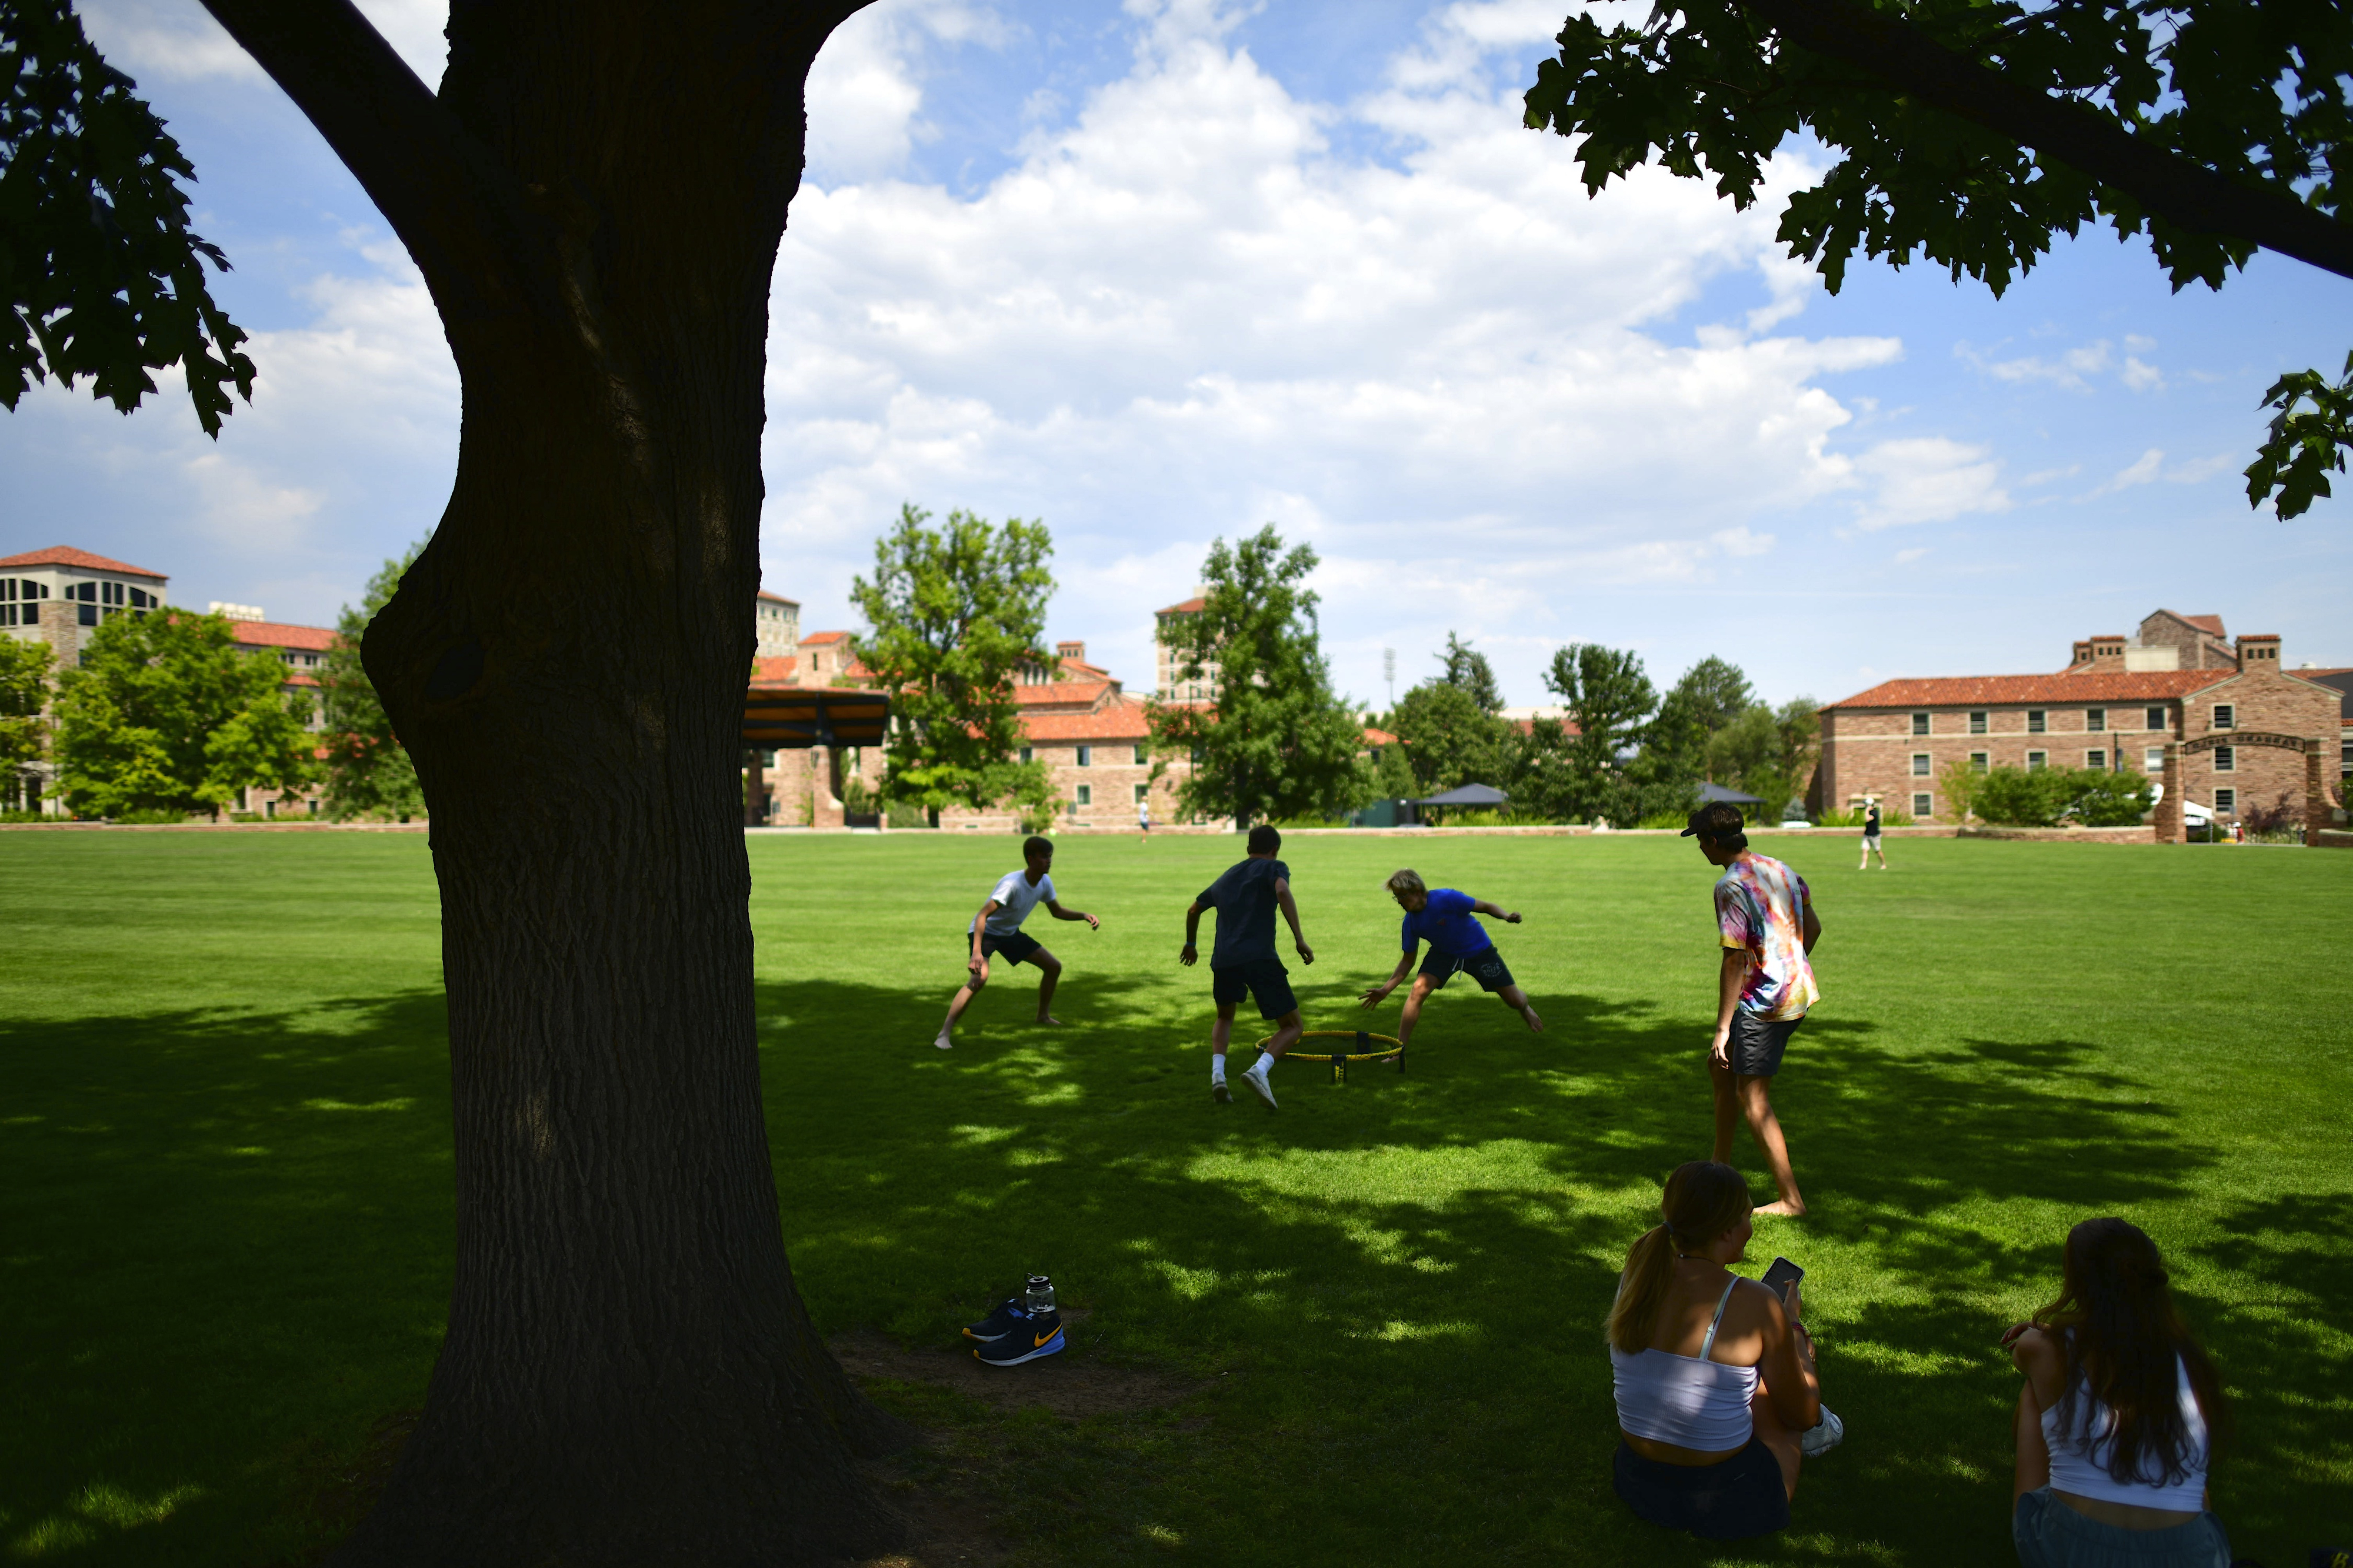 Students play on the lawn at the University of Colorado at Boulder campus on a bright sunny day.